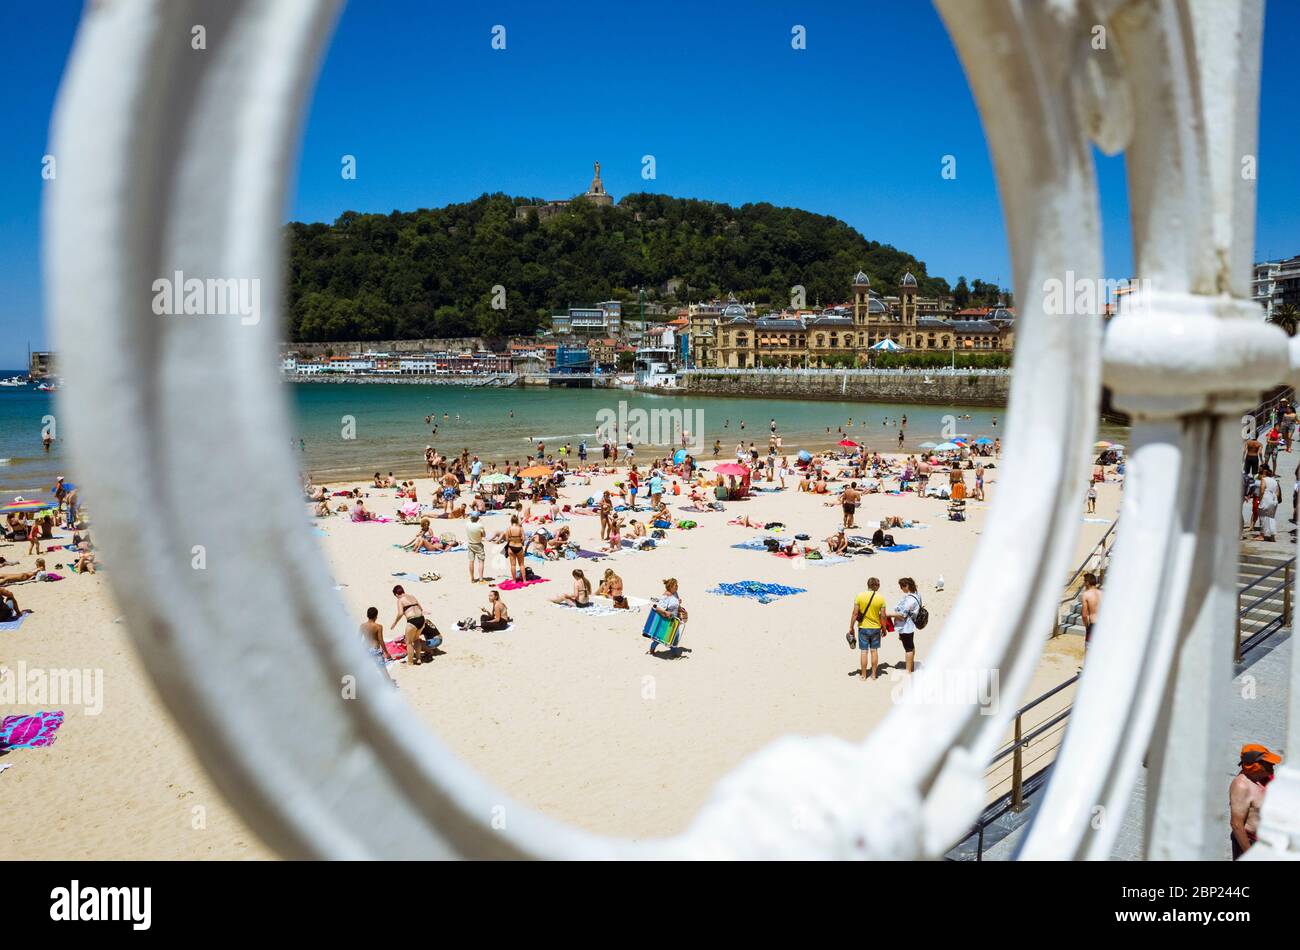 Donostia, Gipuzkoa, Basque Country, Spain - July 12th, 2019 : View through the iconic banister of La Concha beach. Sunbathers and Urgull hill in backg Stock Photo